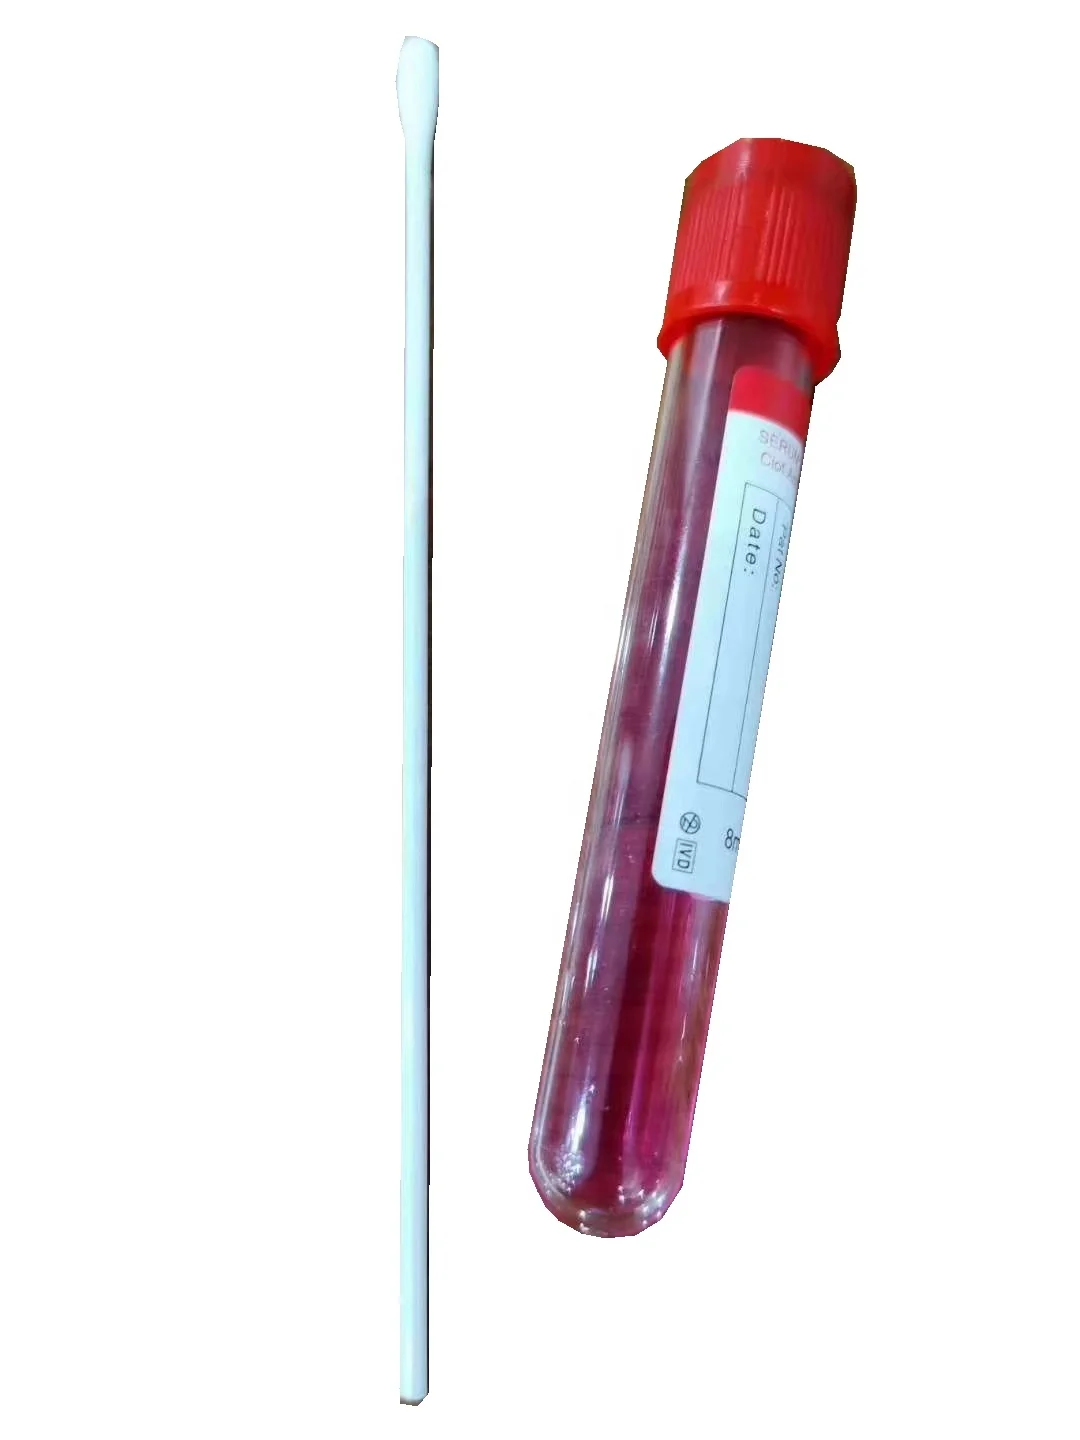 
low factory price Viral transport medium tubes with virus storage solution and swabs 